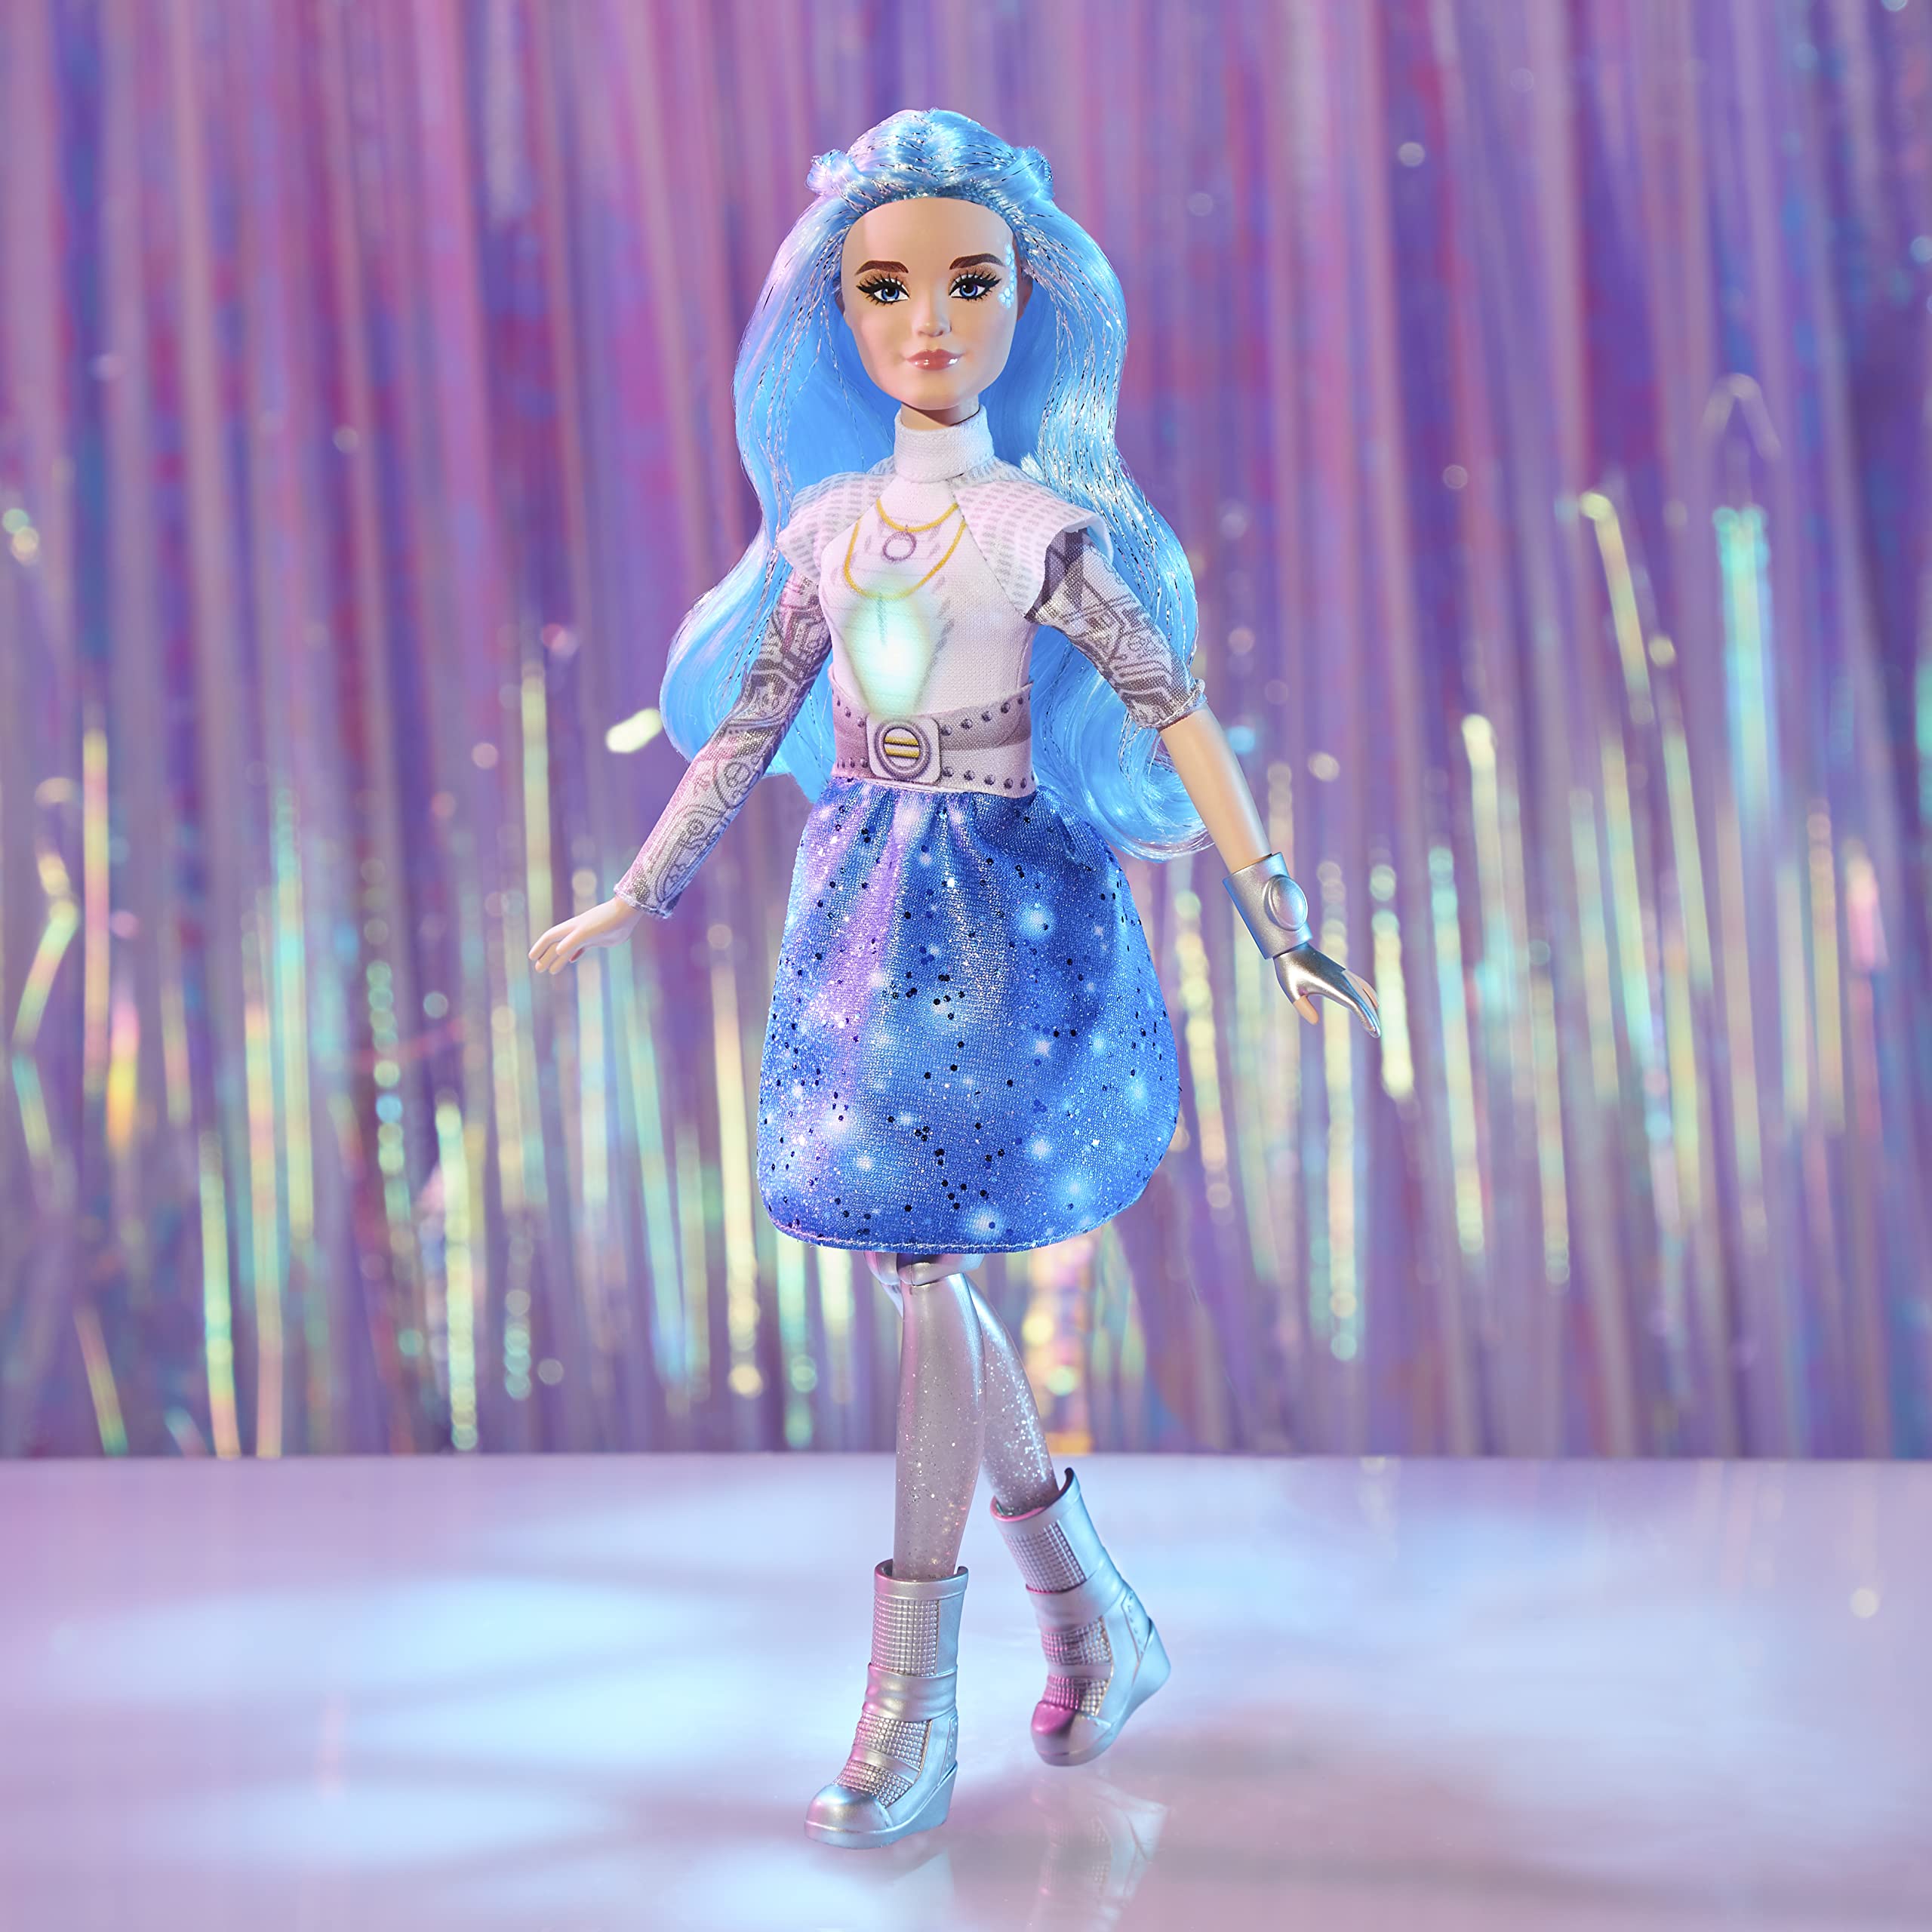 Disney Princess Zombies 3 Singing Addison Fashion Doll - Light-Up Doll with Music and Singing, Outfit and Accessories. Toy for Kids Age 6+